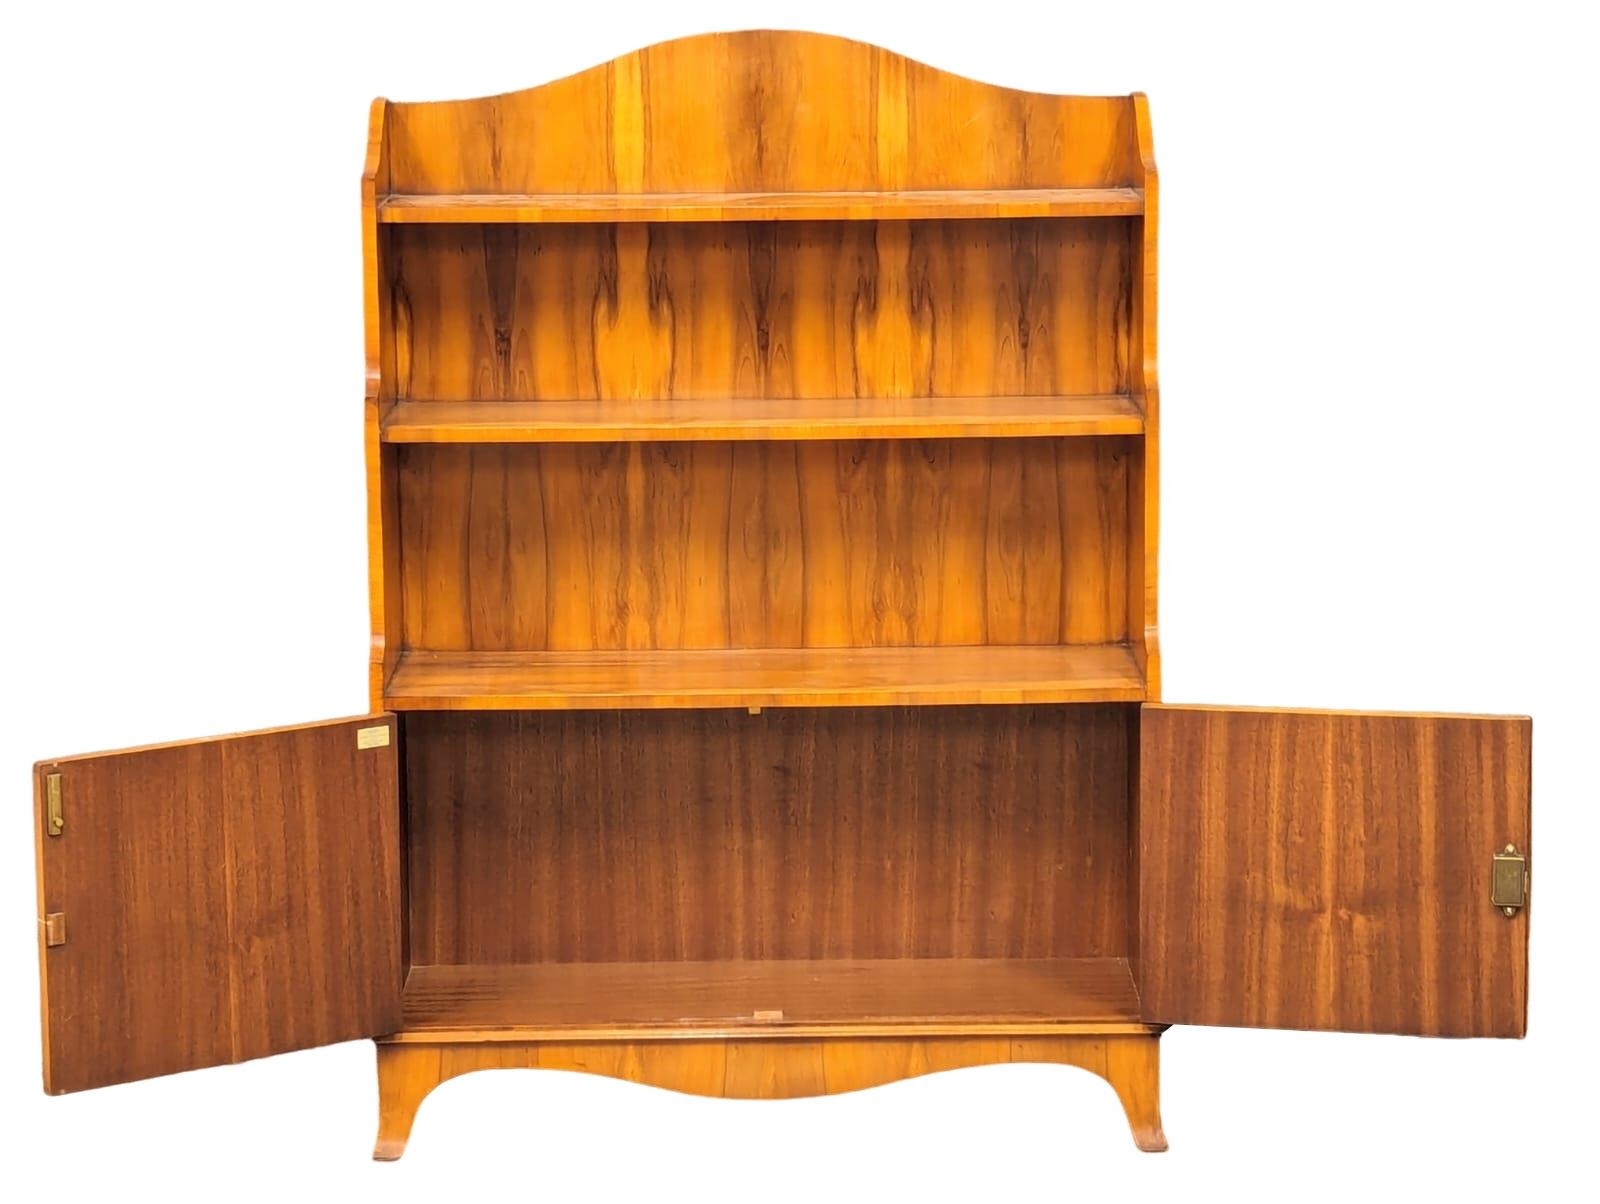 A yew wood open bookcase with 2 door cupboard. 84x26x120cm - Image 4 of 6